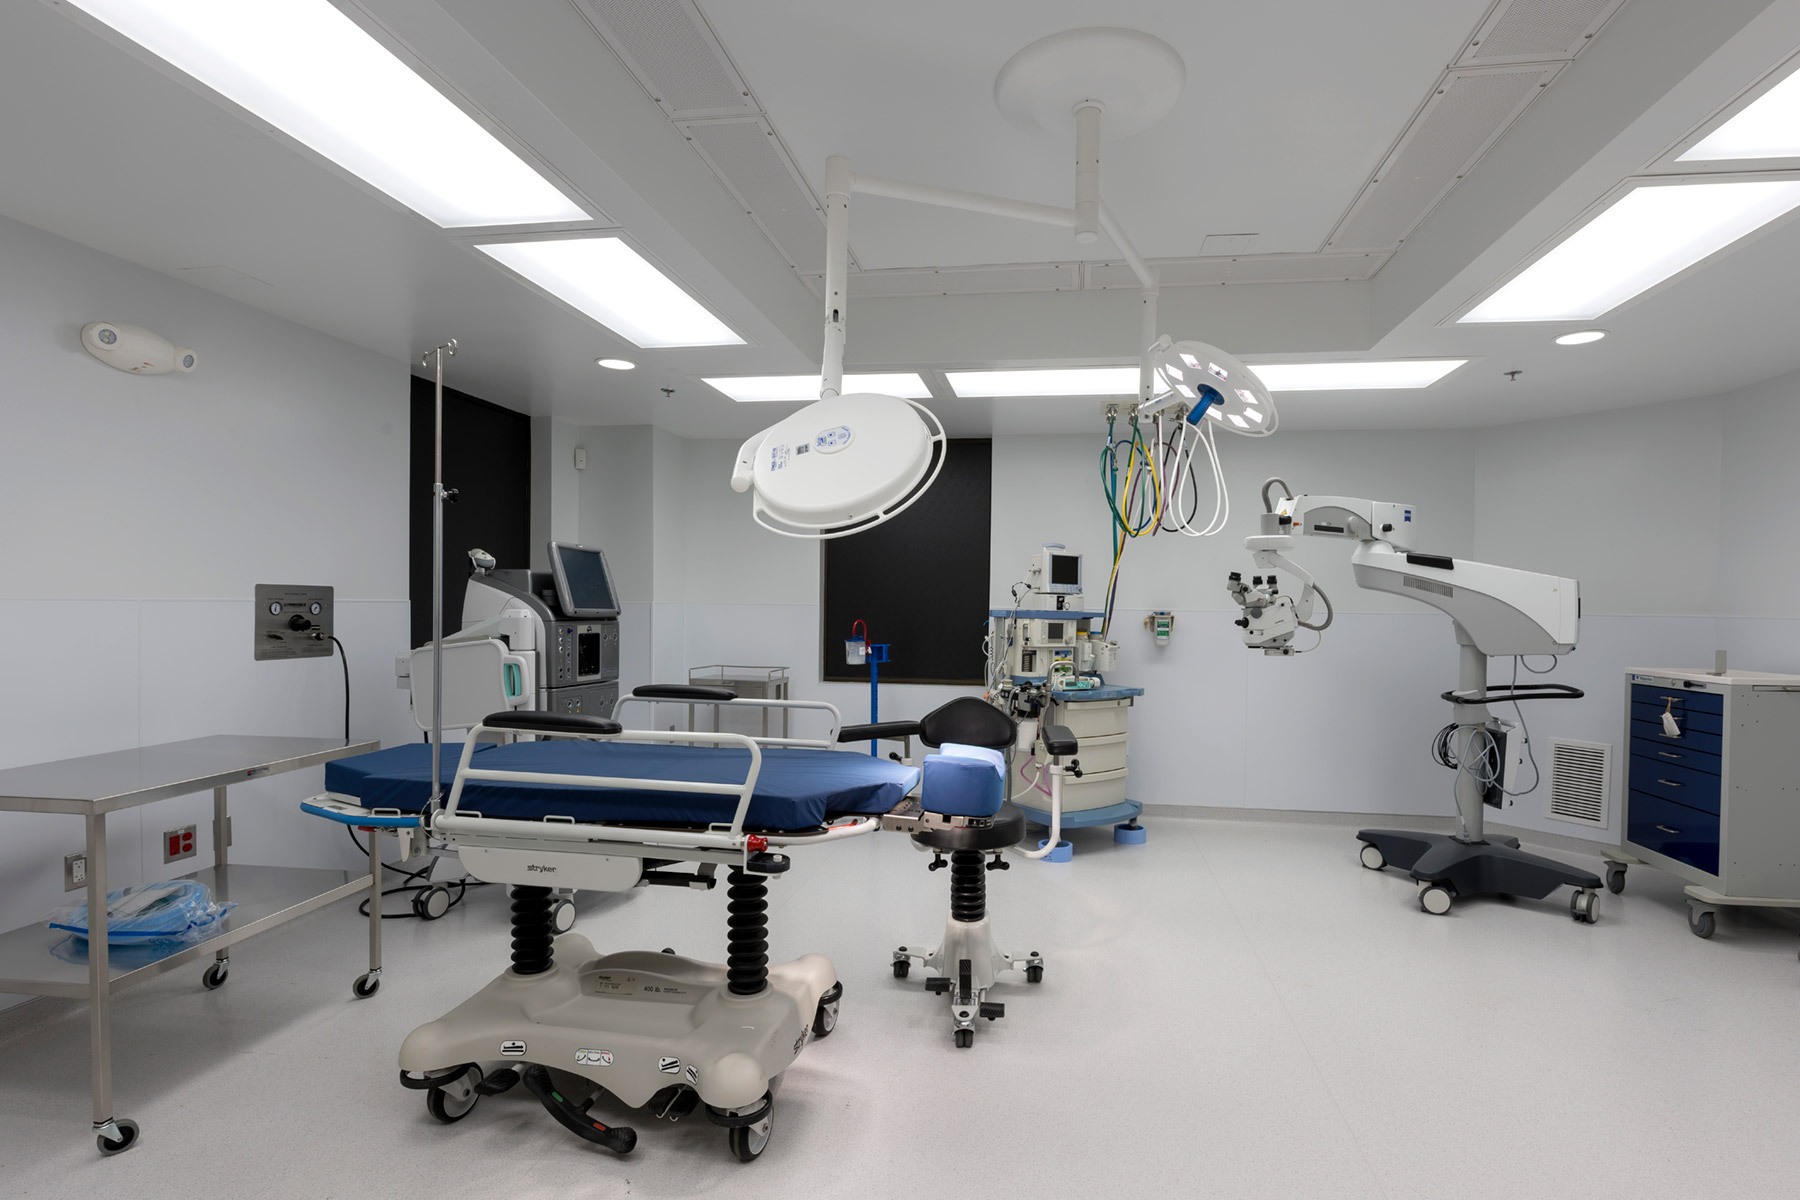 Operating Room Light - Commercial Build-Out of Retina Surgical Center in Niles Custom Home. America's Custom Home Builders: New Construction, Remodeling, Restoration Services. Residential and Commercial.